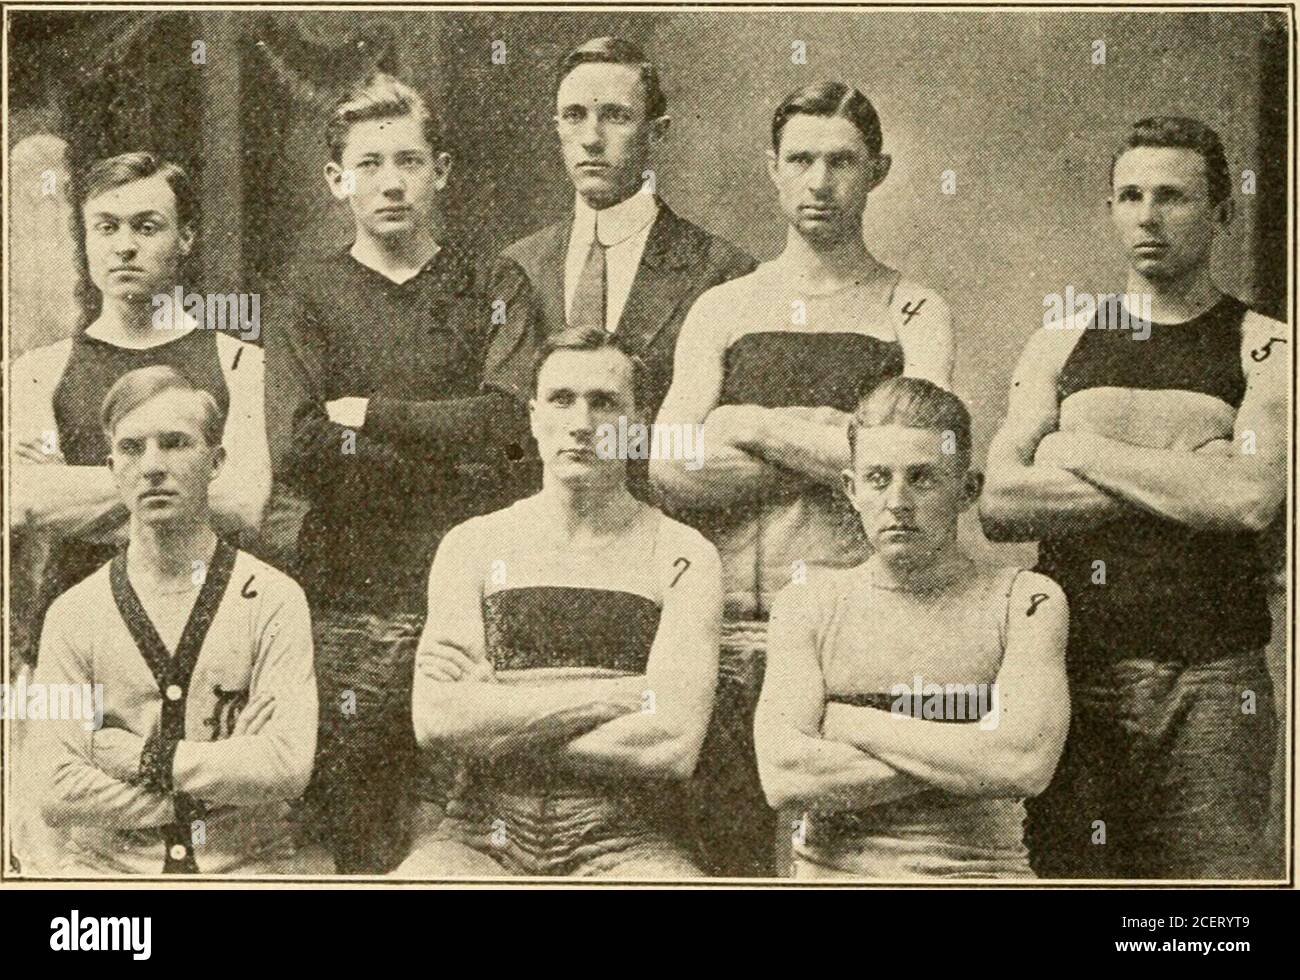 . Spalding's official collegiate basket ball guide. 1, Cayou, Coach; 2. McCarty; 3. Maenner: 4, Theilanius, Mgr ; 5. Gray; 6, Bright-field; 7, Falvey, Capt.; 8, Berryhill; 9 Conrades, Rosch, Photo.WASHINGTON UNIVERSITY, ST LOUIS. MO.. Mgr.; 4, Wilmotb; Gould; G, Scott; 1. Cassiday; 2, Roid; 3. OCo7, Mulloniiex, (apt.; 8, .May. DAVIS AND EIJvIXS COLLEGE TEAM. ELKINS, W. VA. SPALDINGS ATHLETIC LIBRARY. 141 OSSRIiIN (OHIO) COIiIiEG-i:. 46âKenyon 12 57âCase 16 49âWitteuberg 11 28âRochester 25 55âKenyon 15 28âRochester 17 37âCase 25 14âSyracuse 31 20âWest Point 3016âWestern Rest-rve 611âOhio State Stock Photo